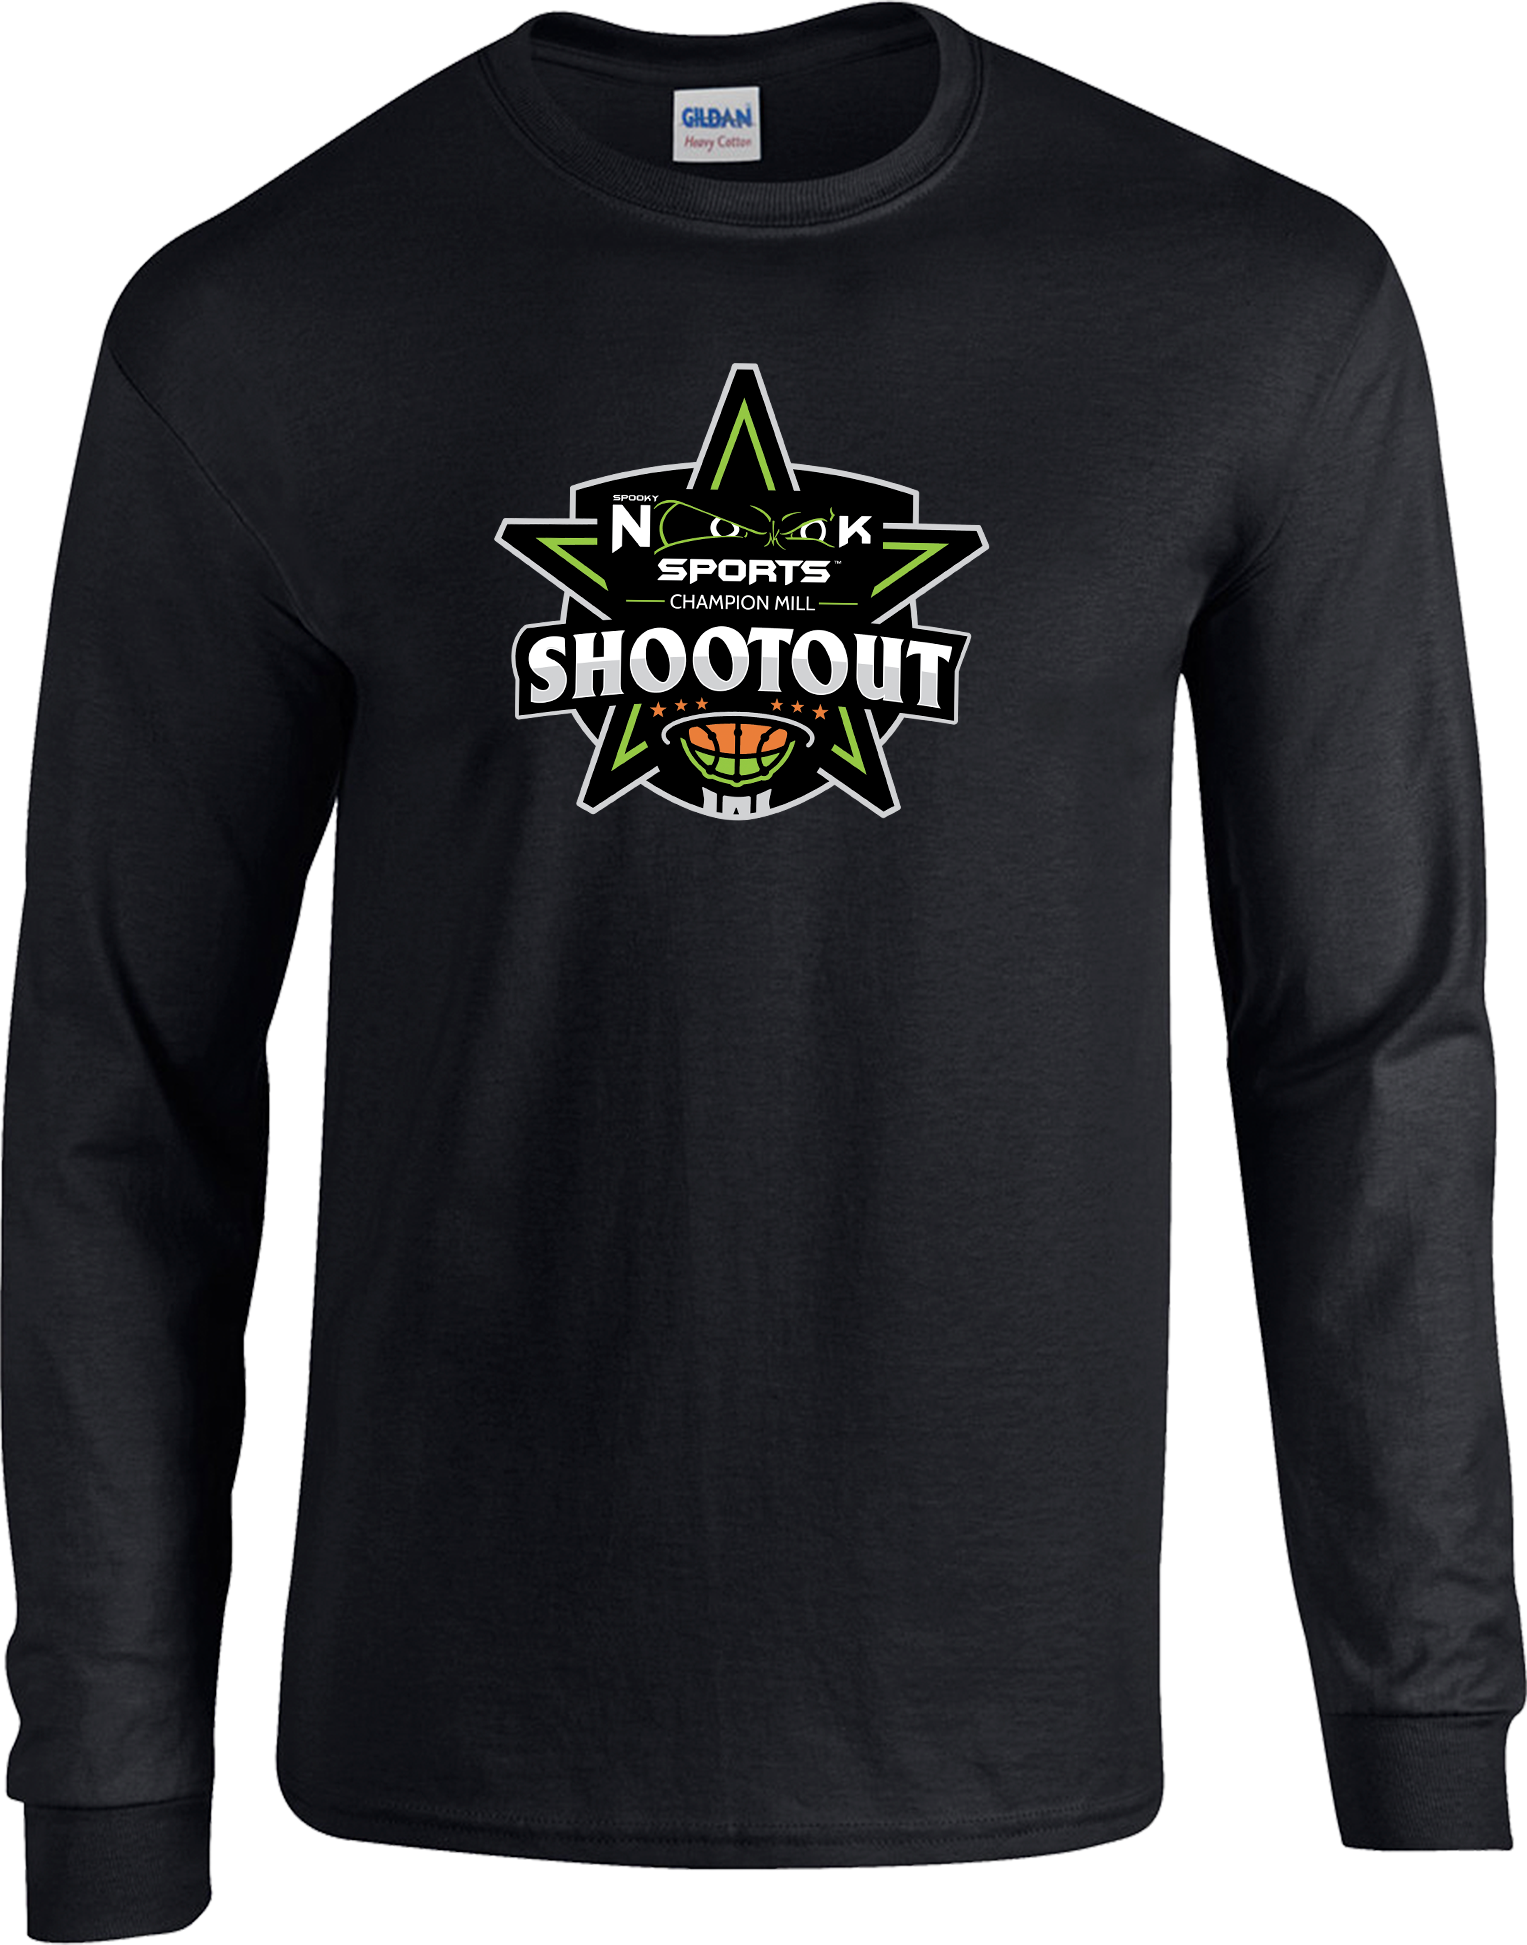 LONG SLEEVES - 2023 Spooky Nook Sports Champion Mill Shootout